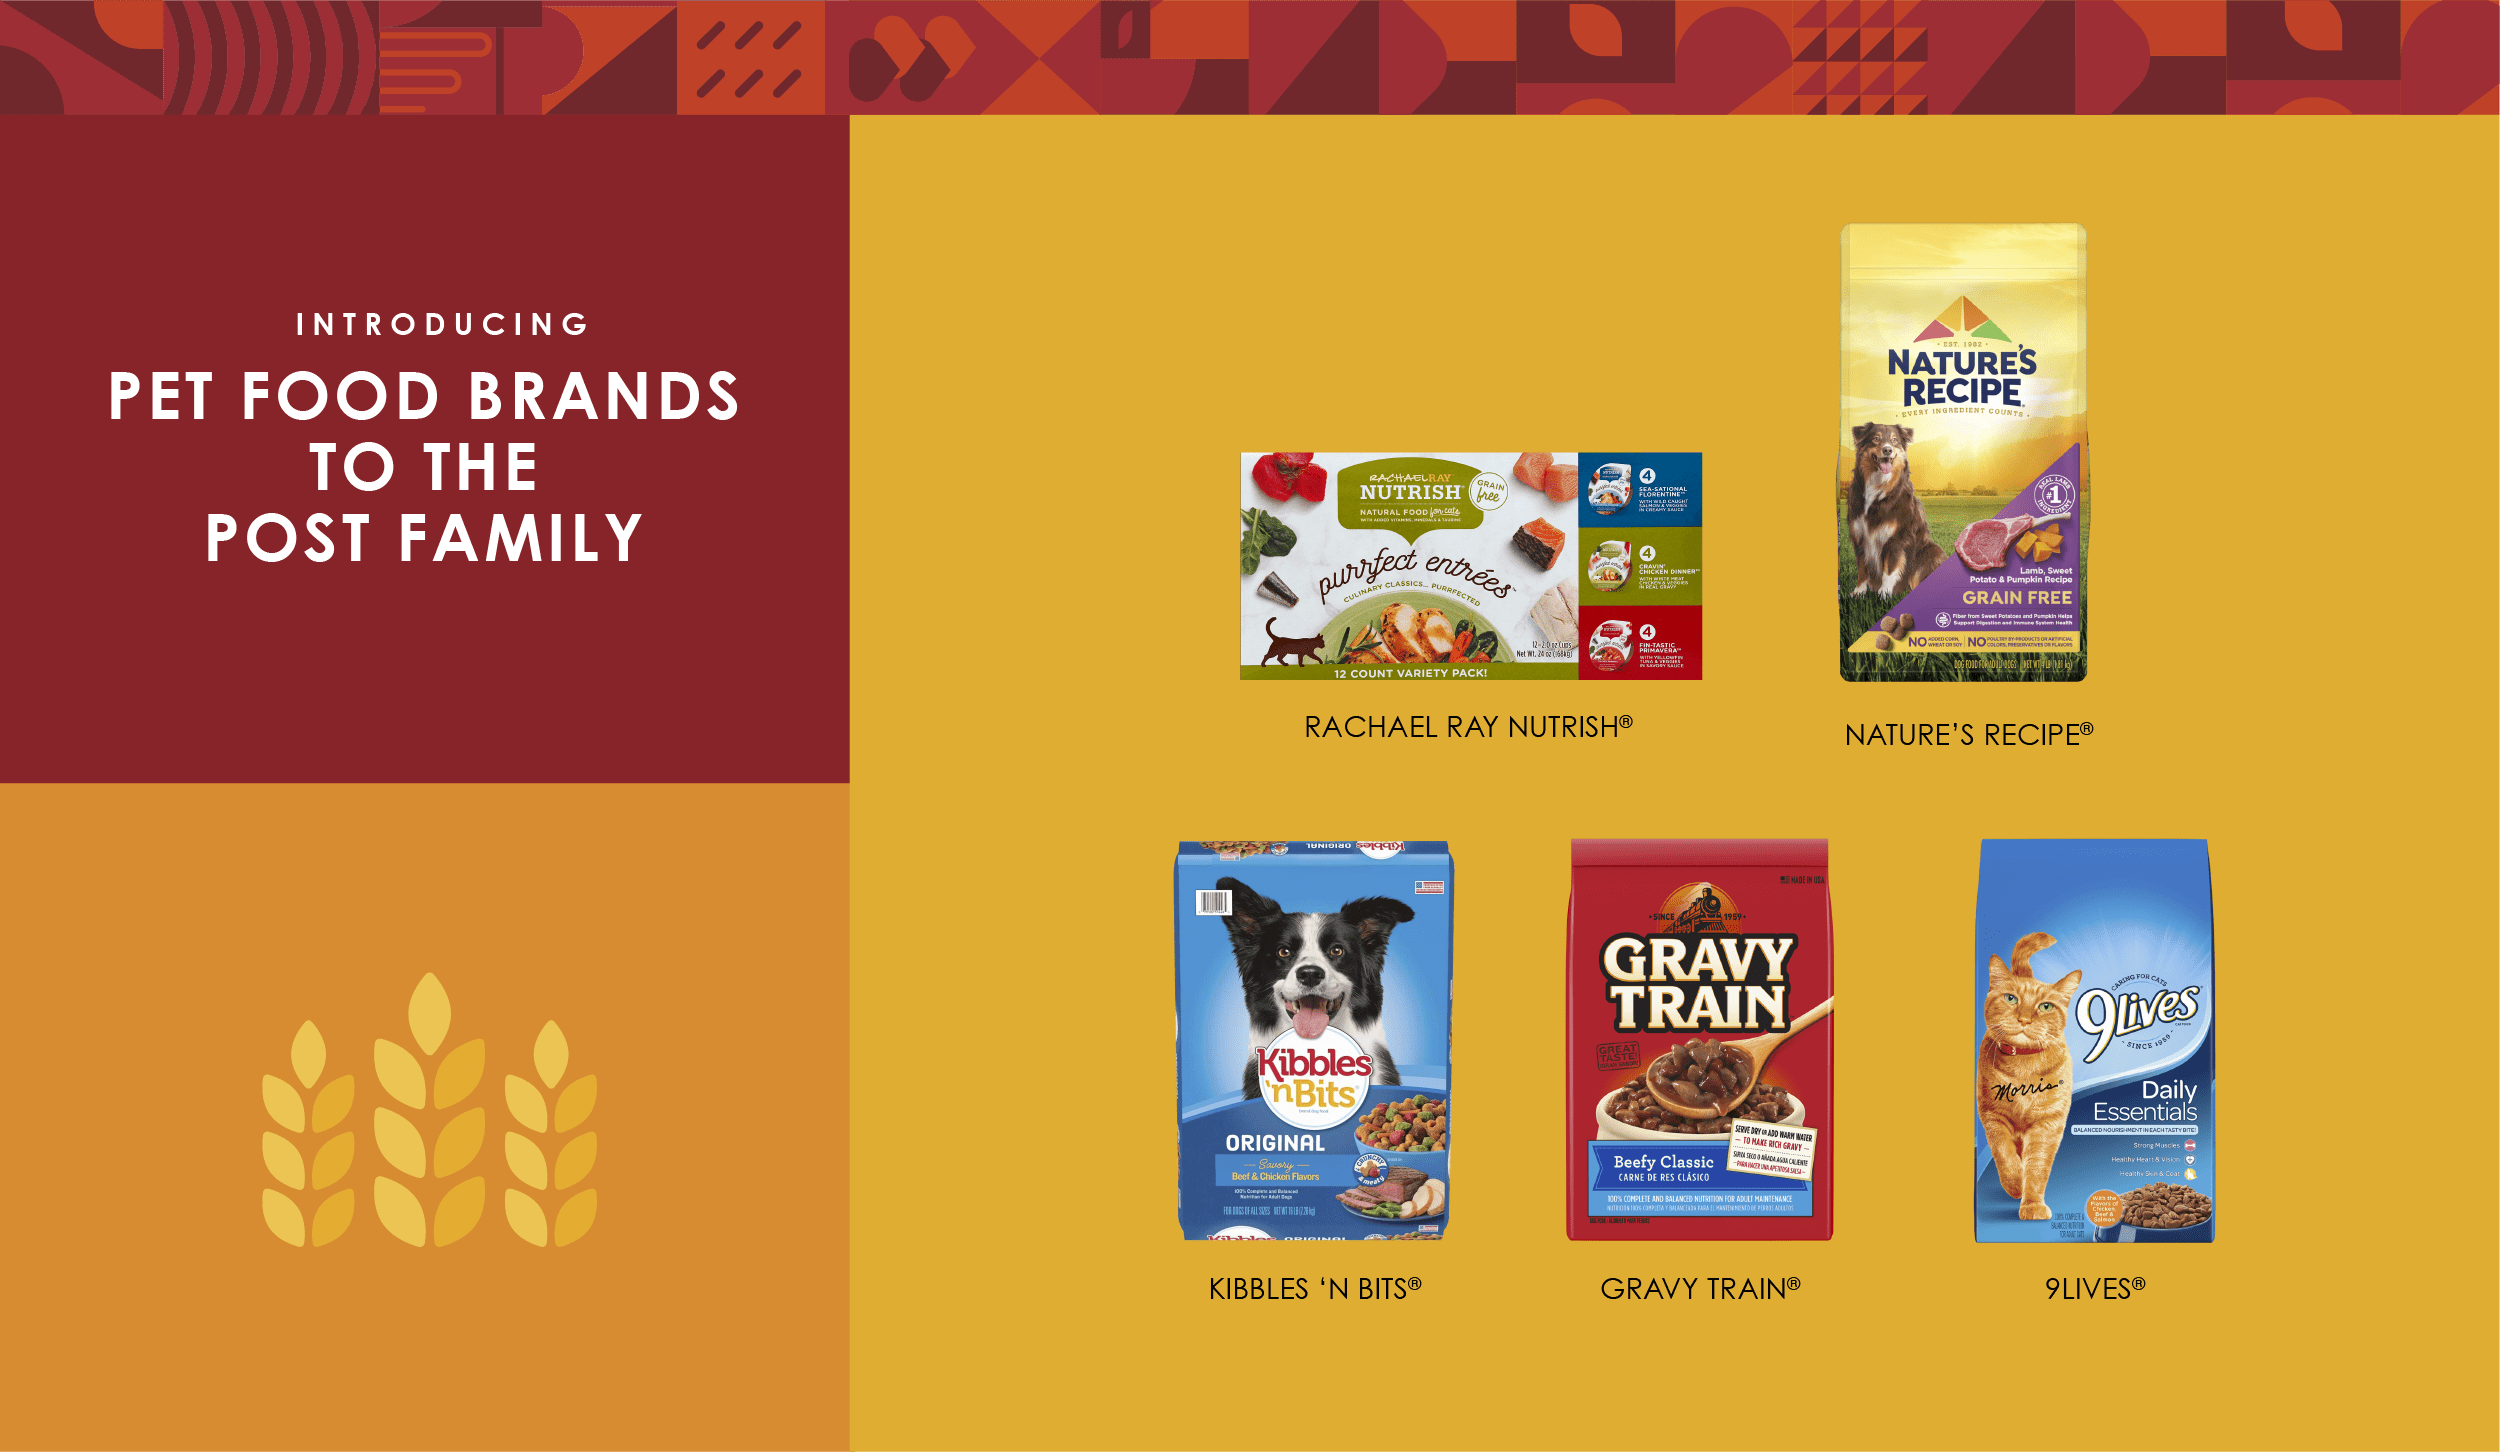 Introducing Pet Food Brands to the Post Family: Rachael Ray Nutrish, Nature's Recipe, Kibbles 'N Bits, Gravy Train, 9Lives